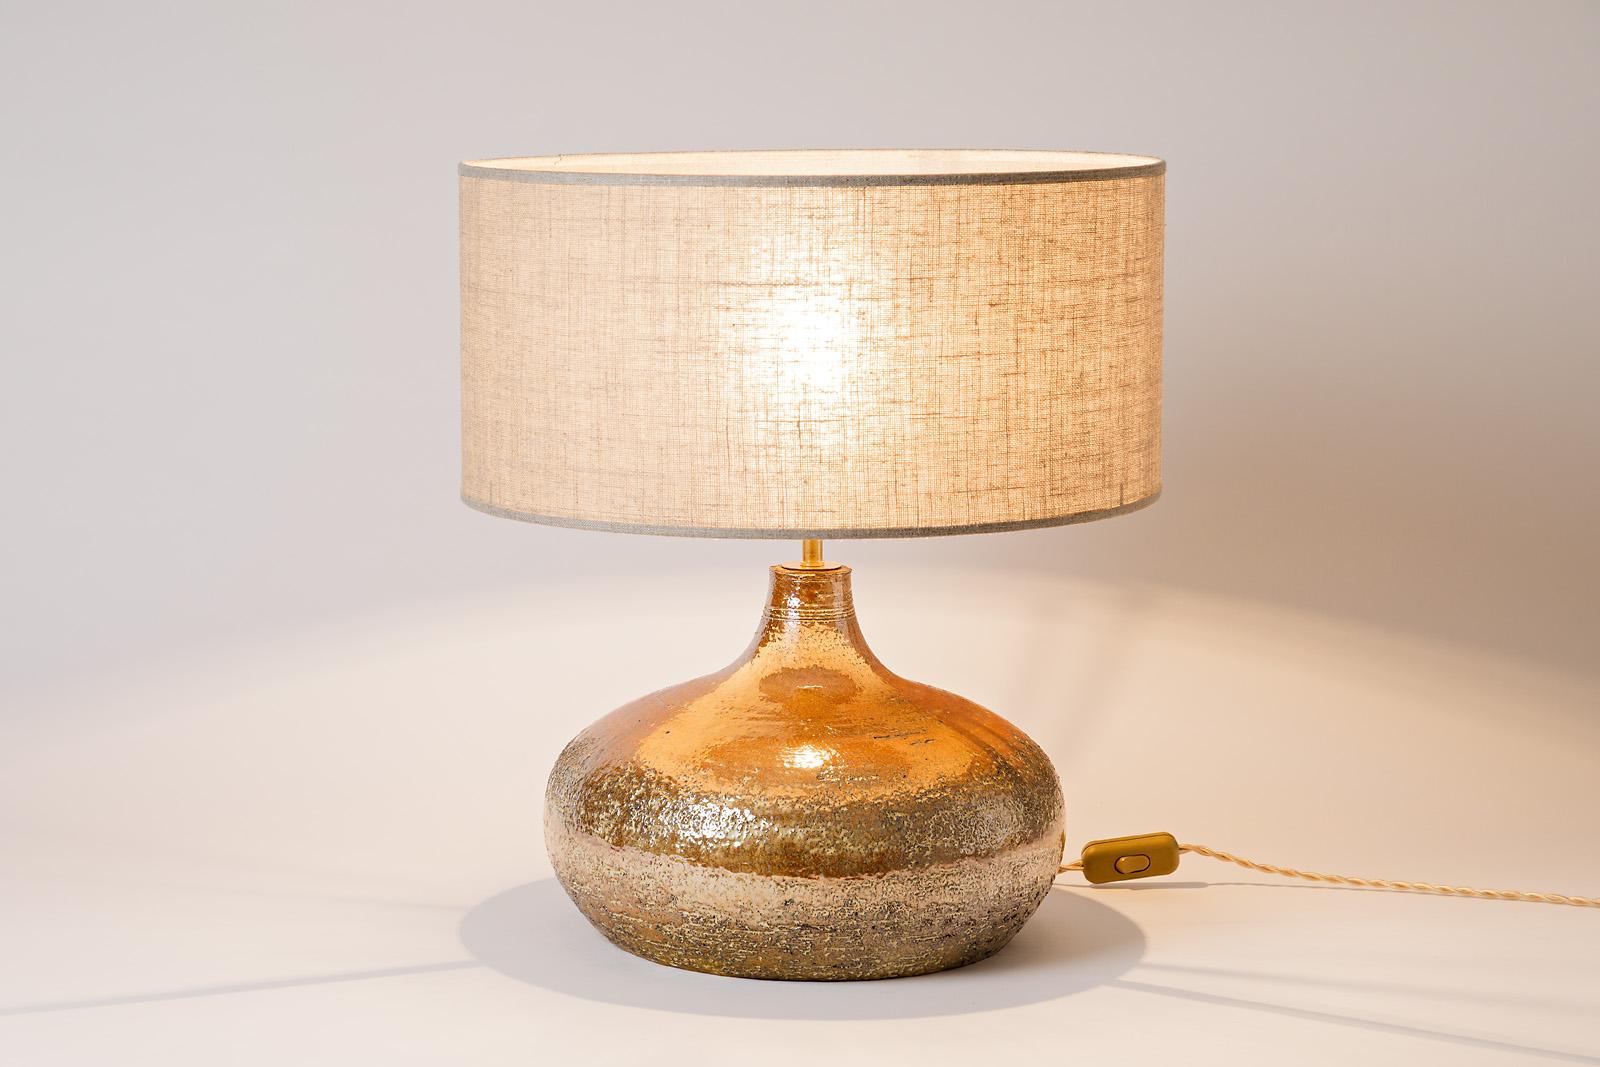 Midcentury Shiny Ceramic Table Lamp by Bessone Vallauris with Gold Glaze Color 2